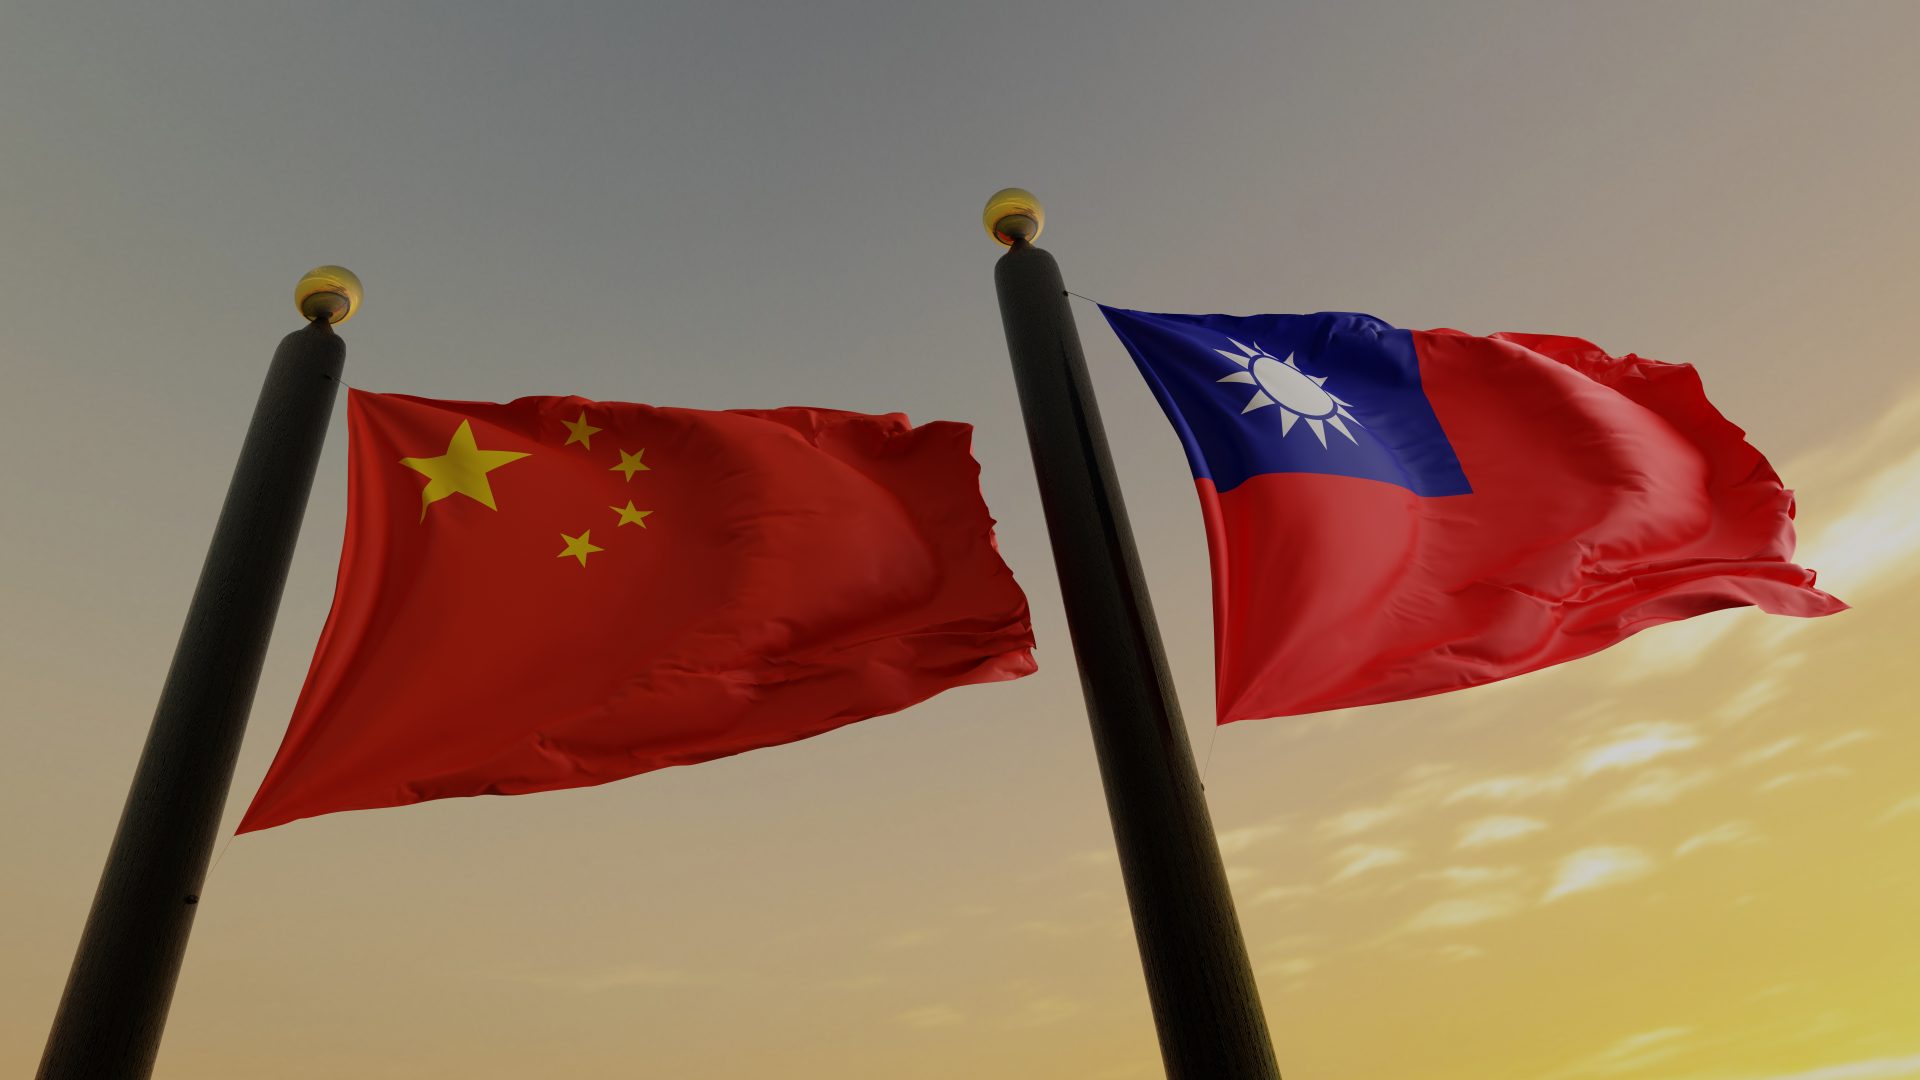 Flags of the People's Republic of China and of Taiwan (Republic of China) (Image: Getty)